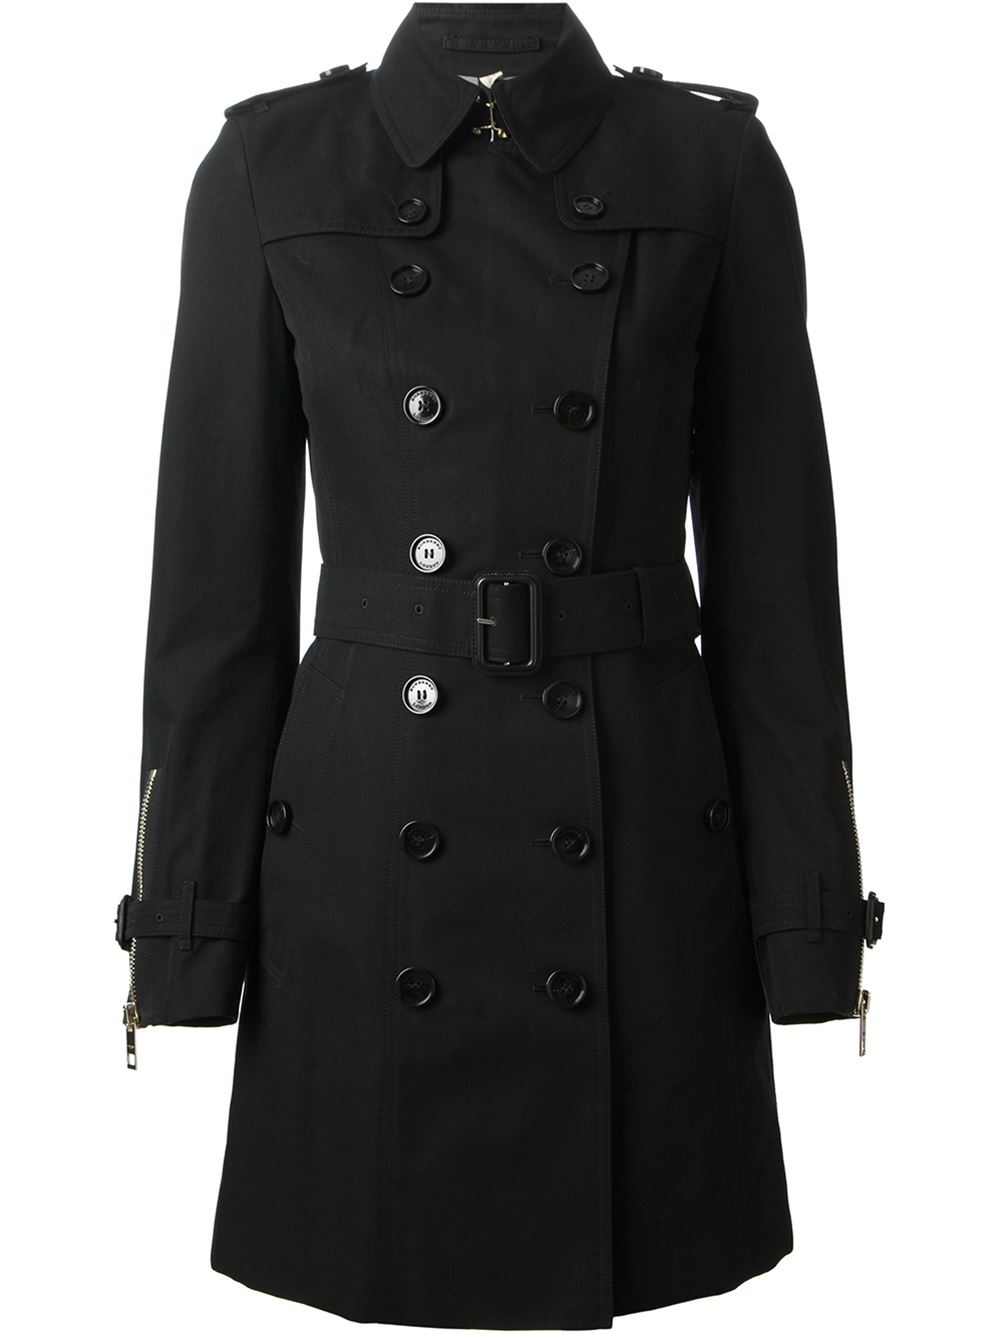 Burberry London Double Breasted Trench Coat in Black | Lyst